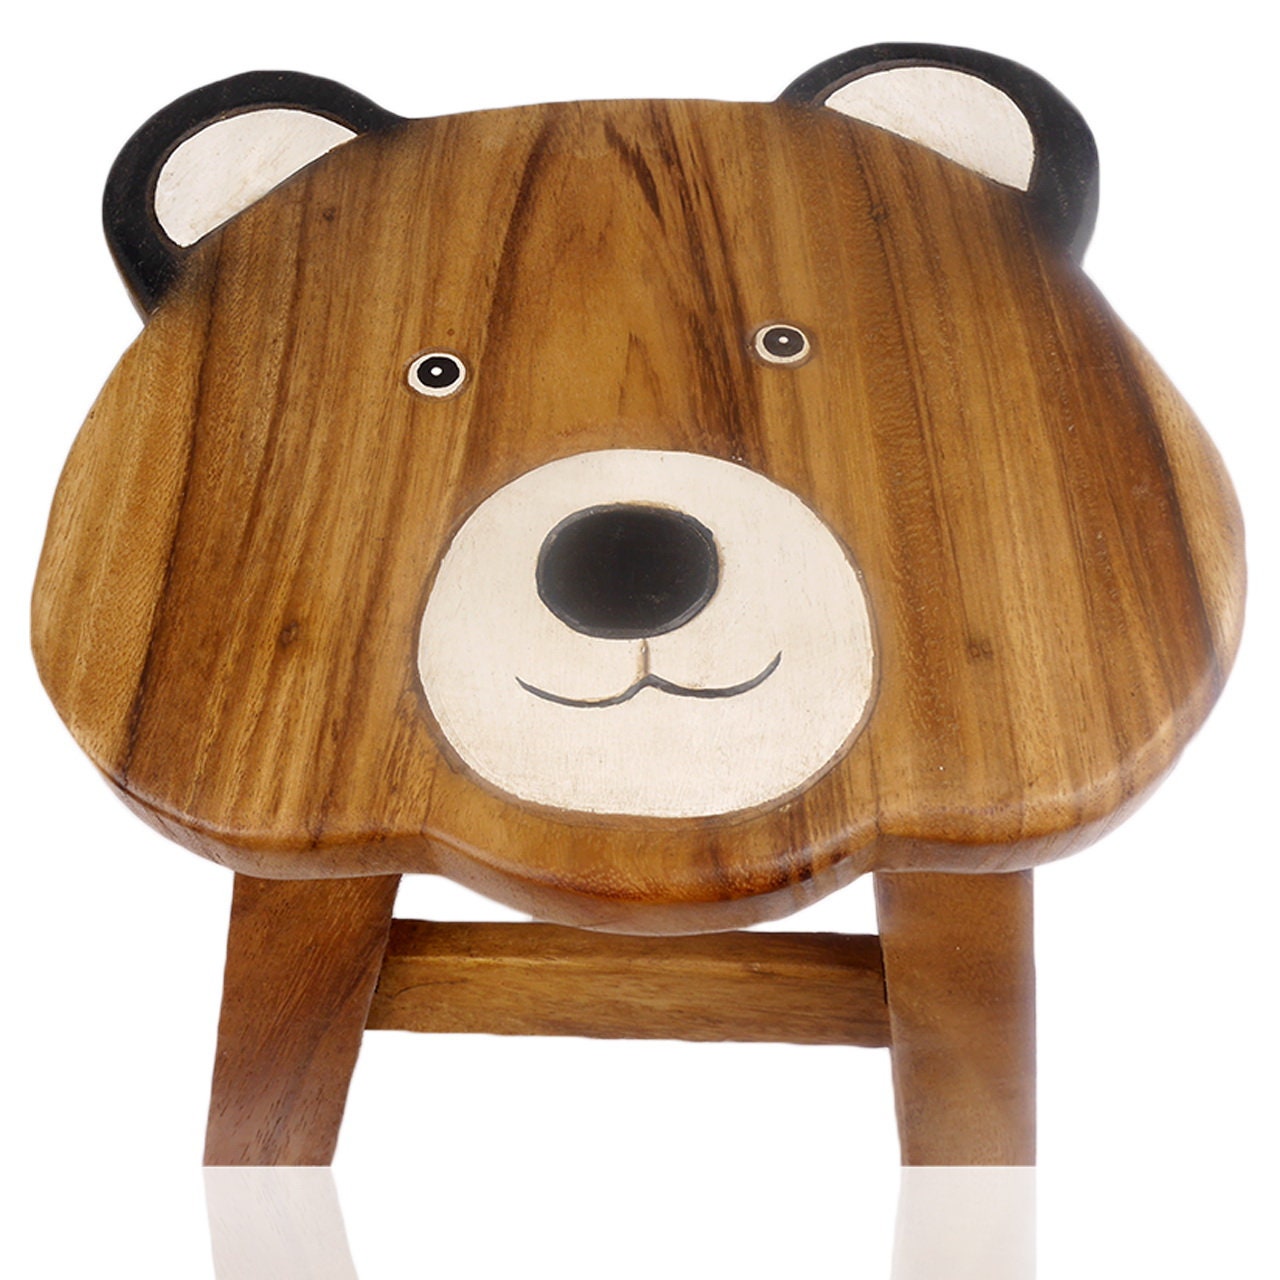 Children's stool wooden stool with animal motif teddy bear painted and carved height 25 cm